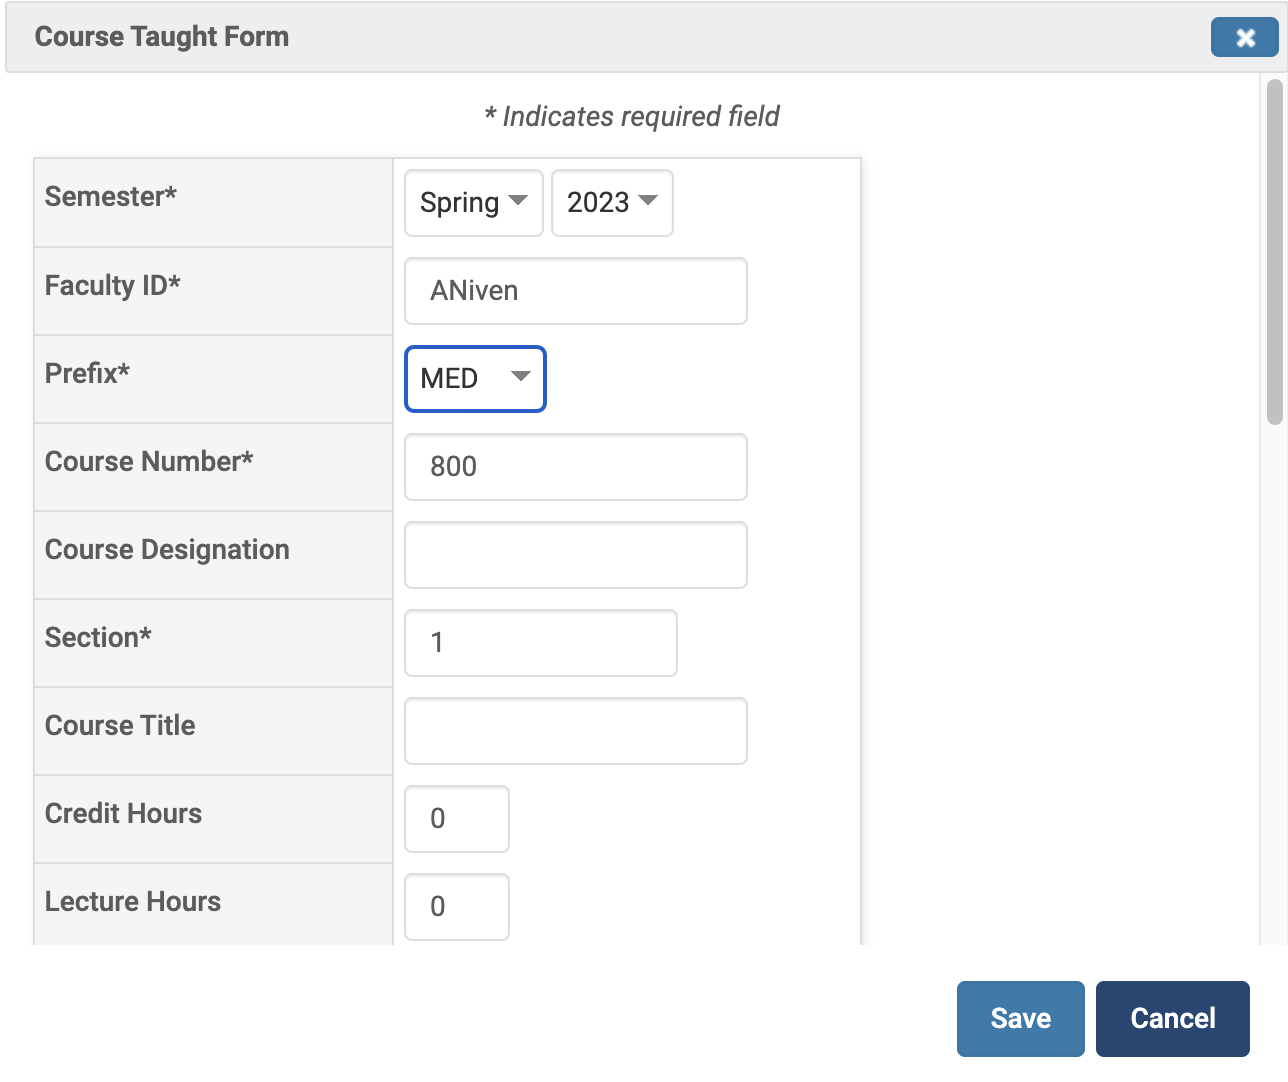 Prefix dropdown selected on the Courses Taught Form